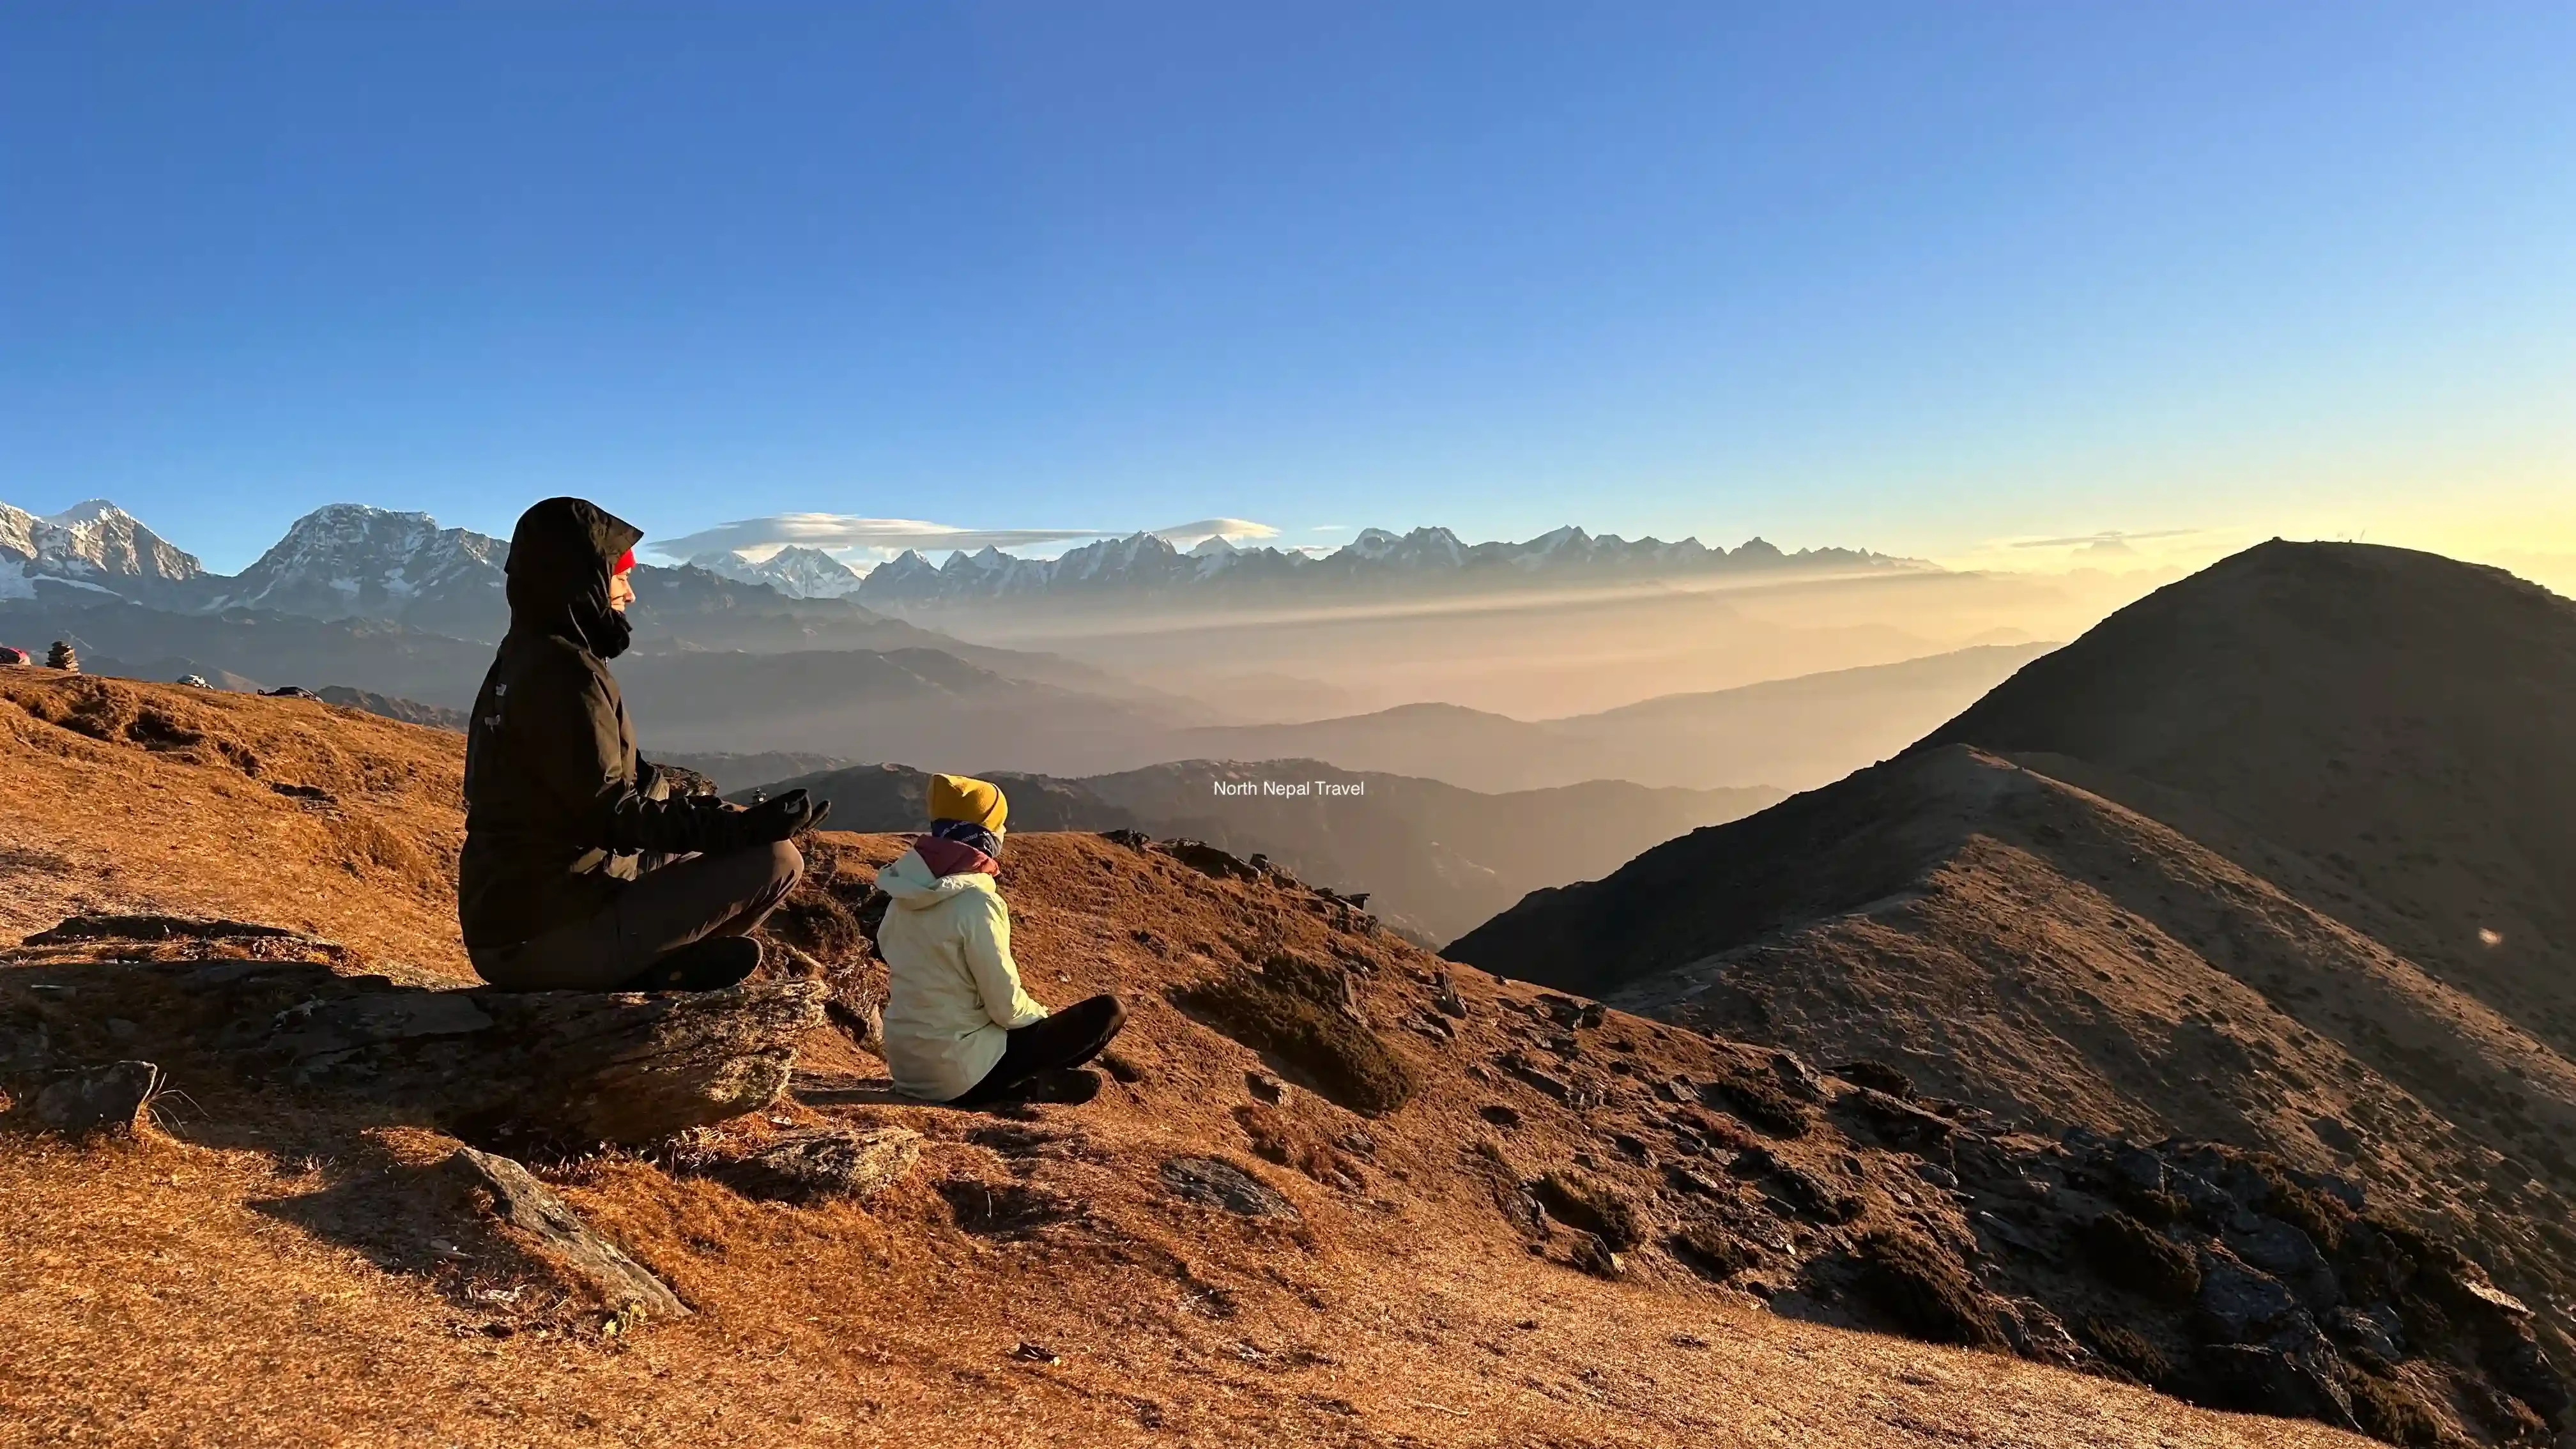 One male and one female trekker from North Nepal Trek meditating on Pikey Peak, with mountain background at the front during Pikey Peak Trek.